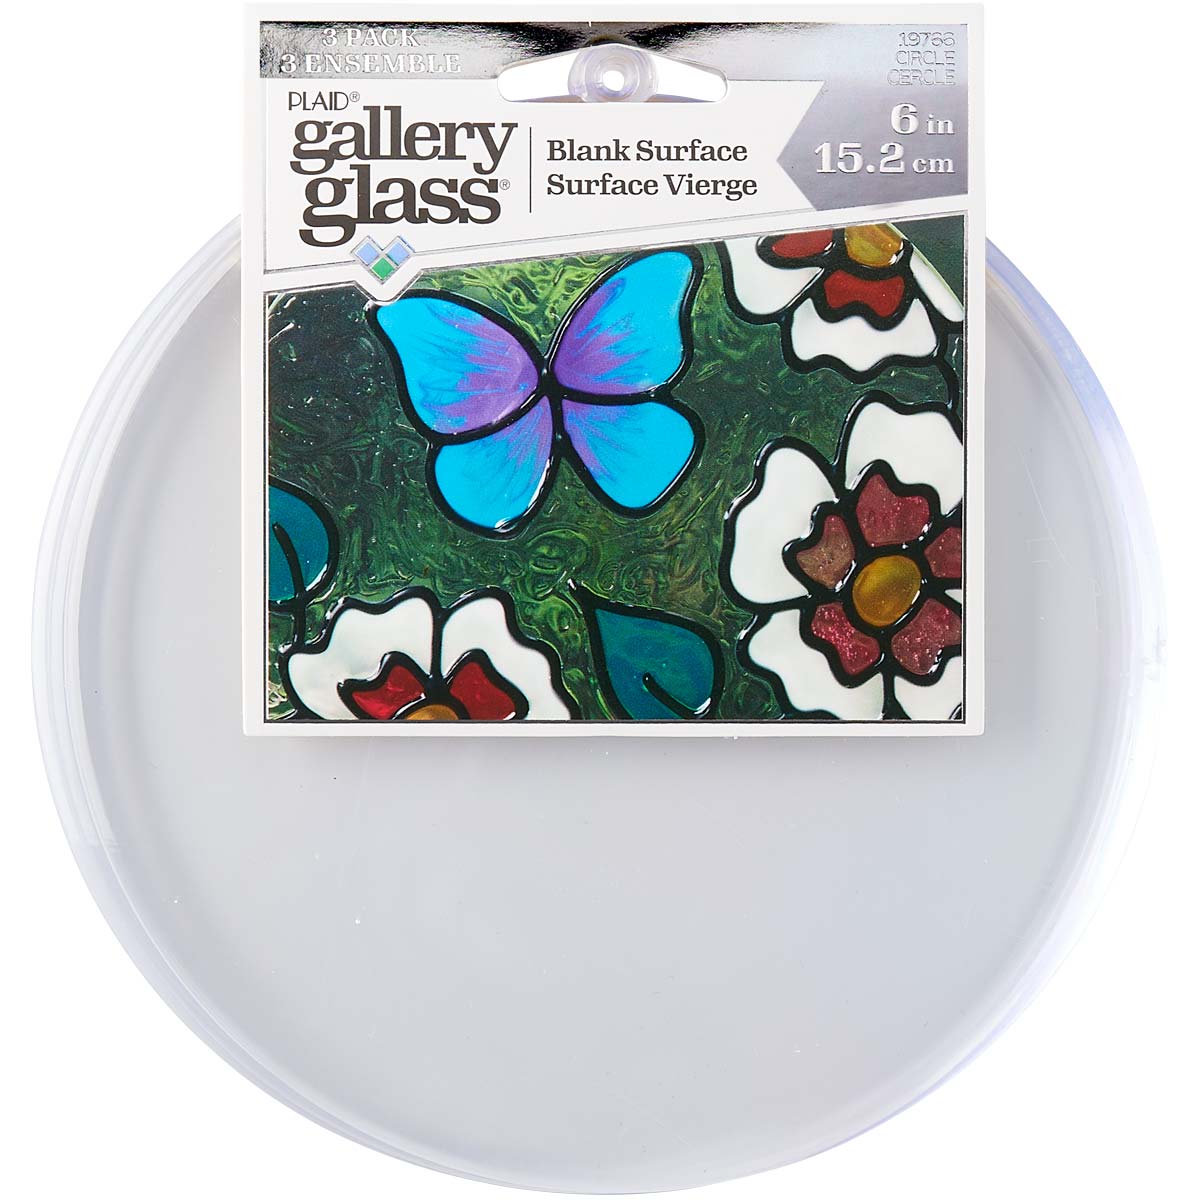 Butterfly Stain Glass- Online Shopping for Butterfly Stain Glass